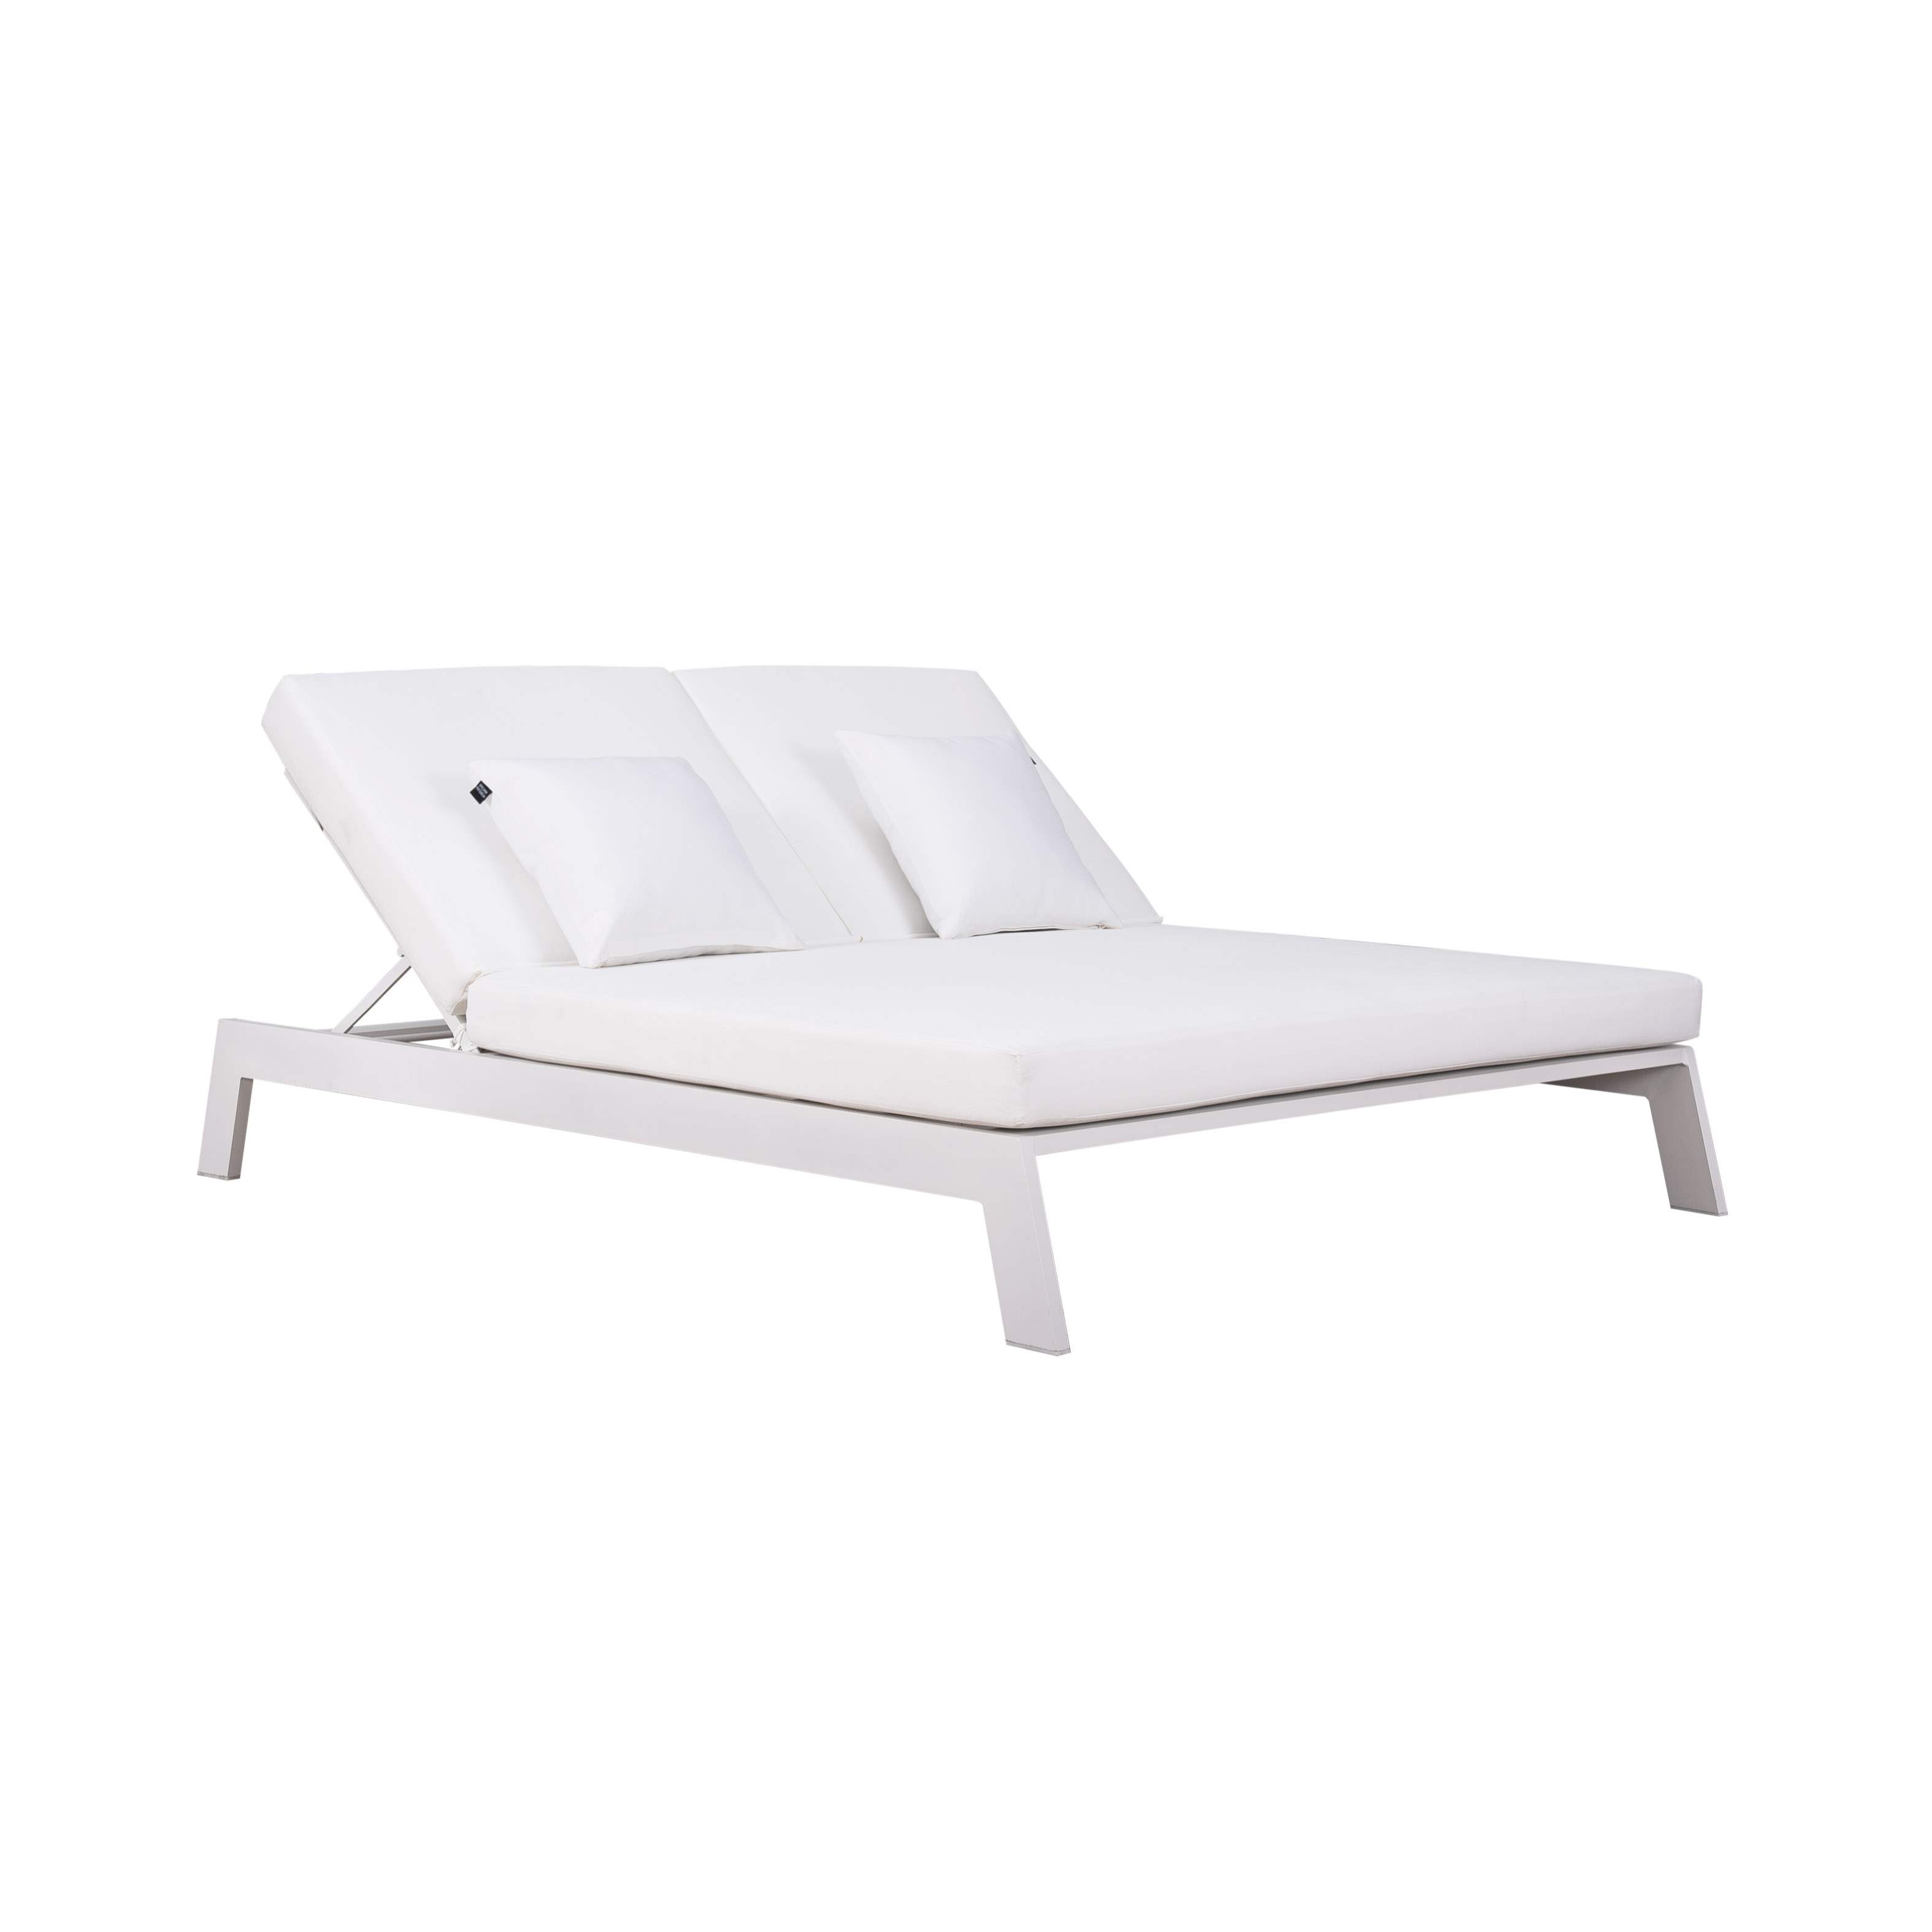 Casa alu. double daybed S4